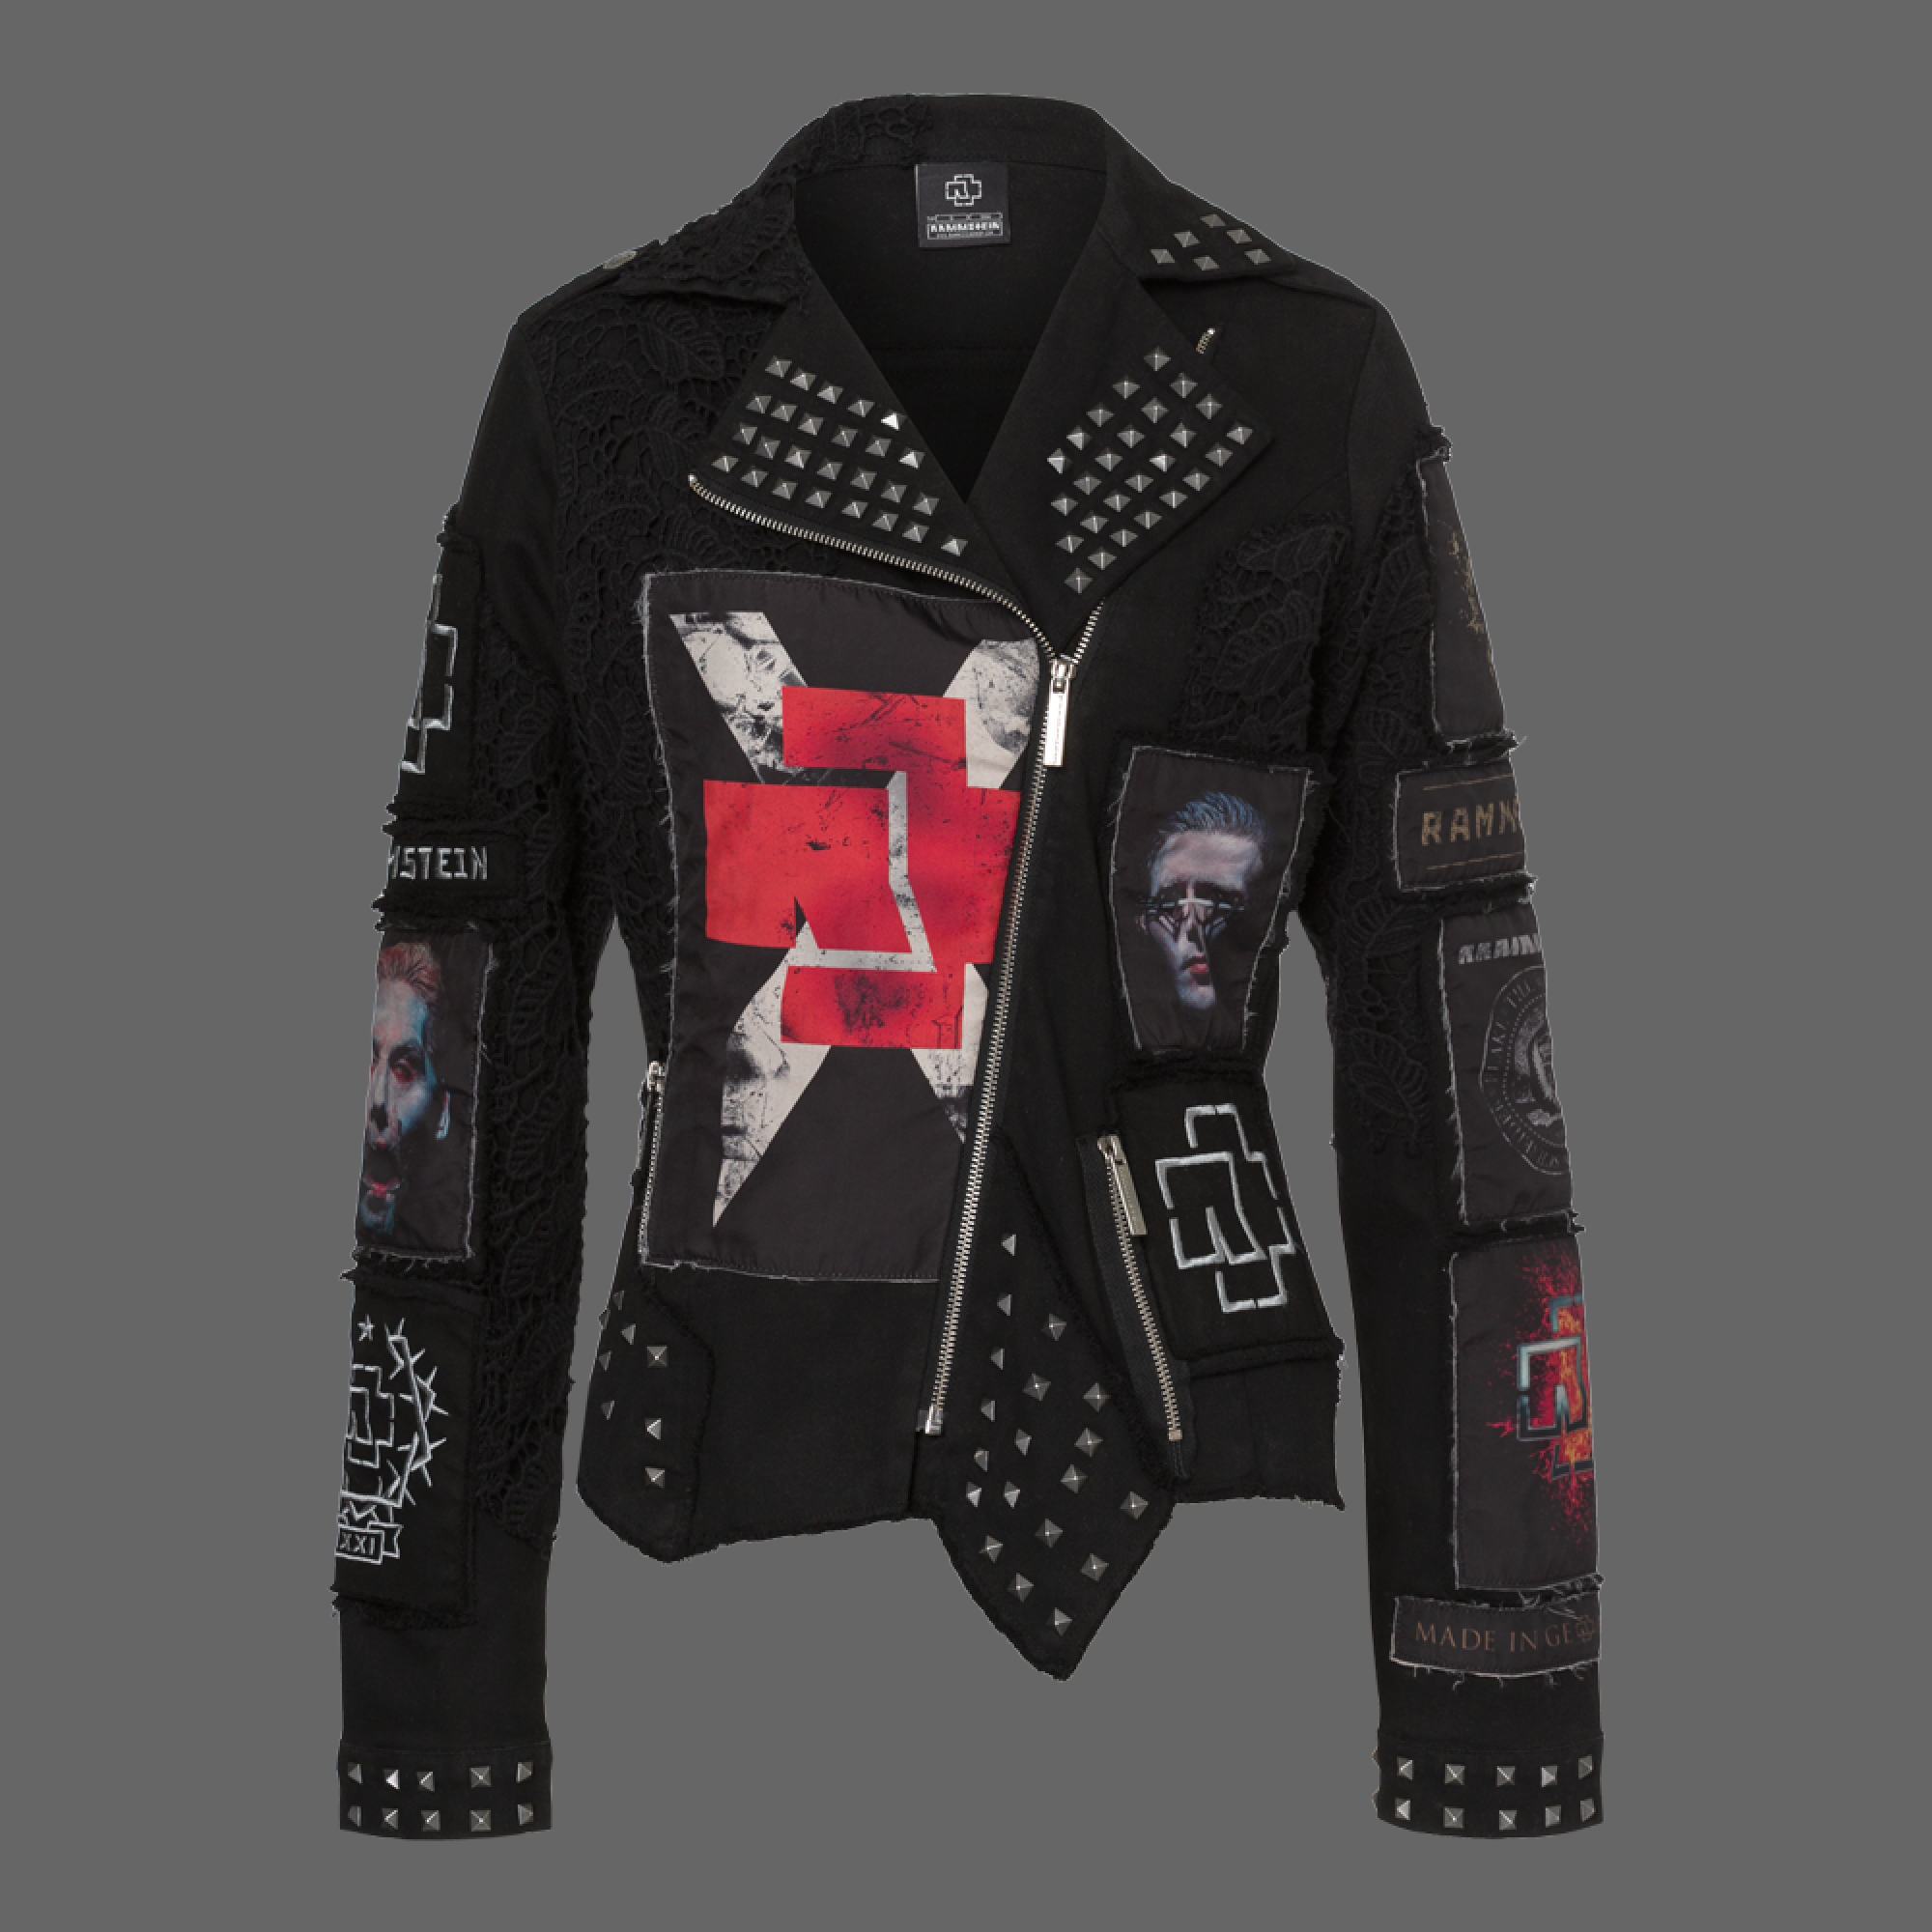 Women's jacket ”Metal Patches”